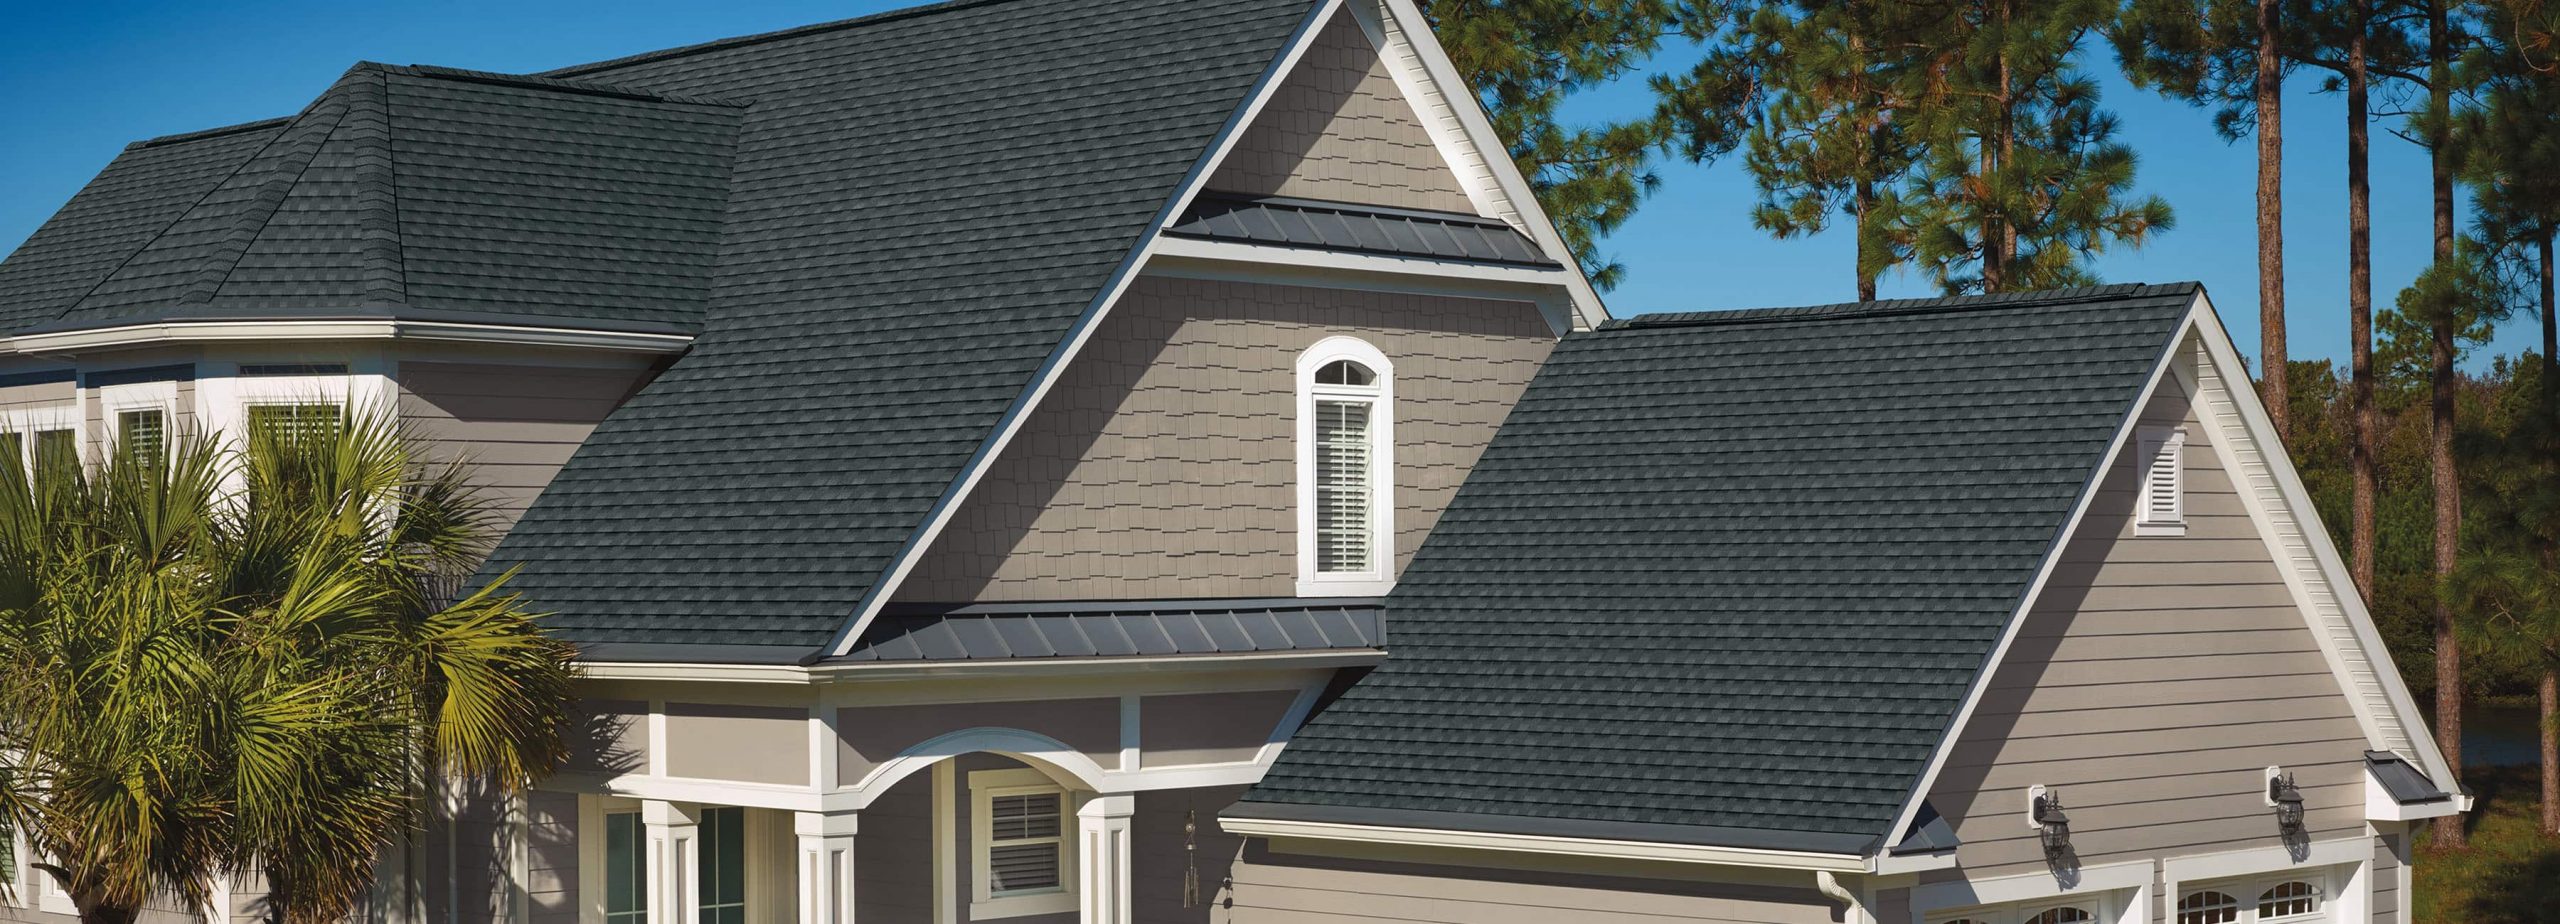 Does new roof increase the appraisal value of Home?